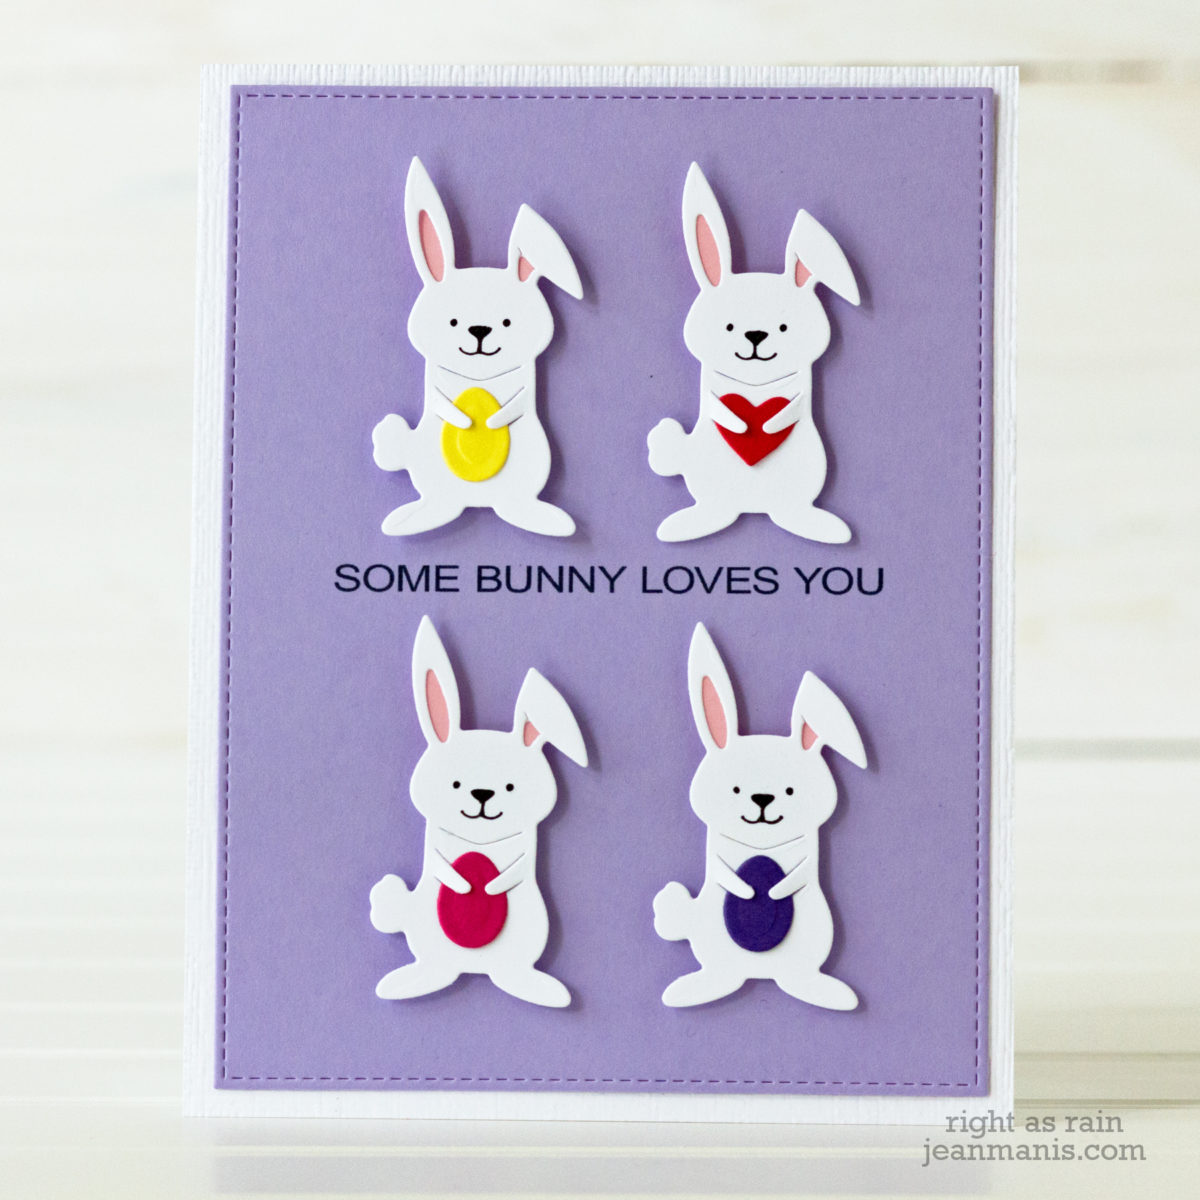 Some Bunny Loves You – Die-cut Easter Card